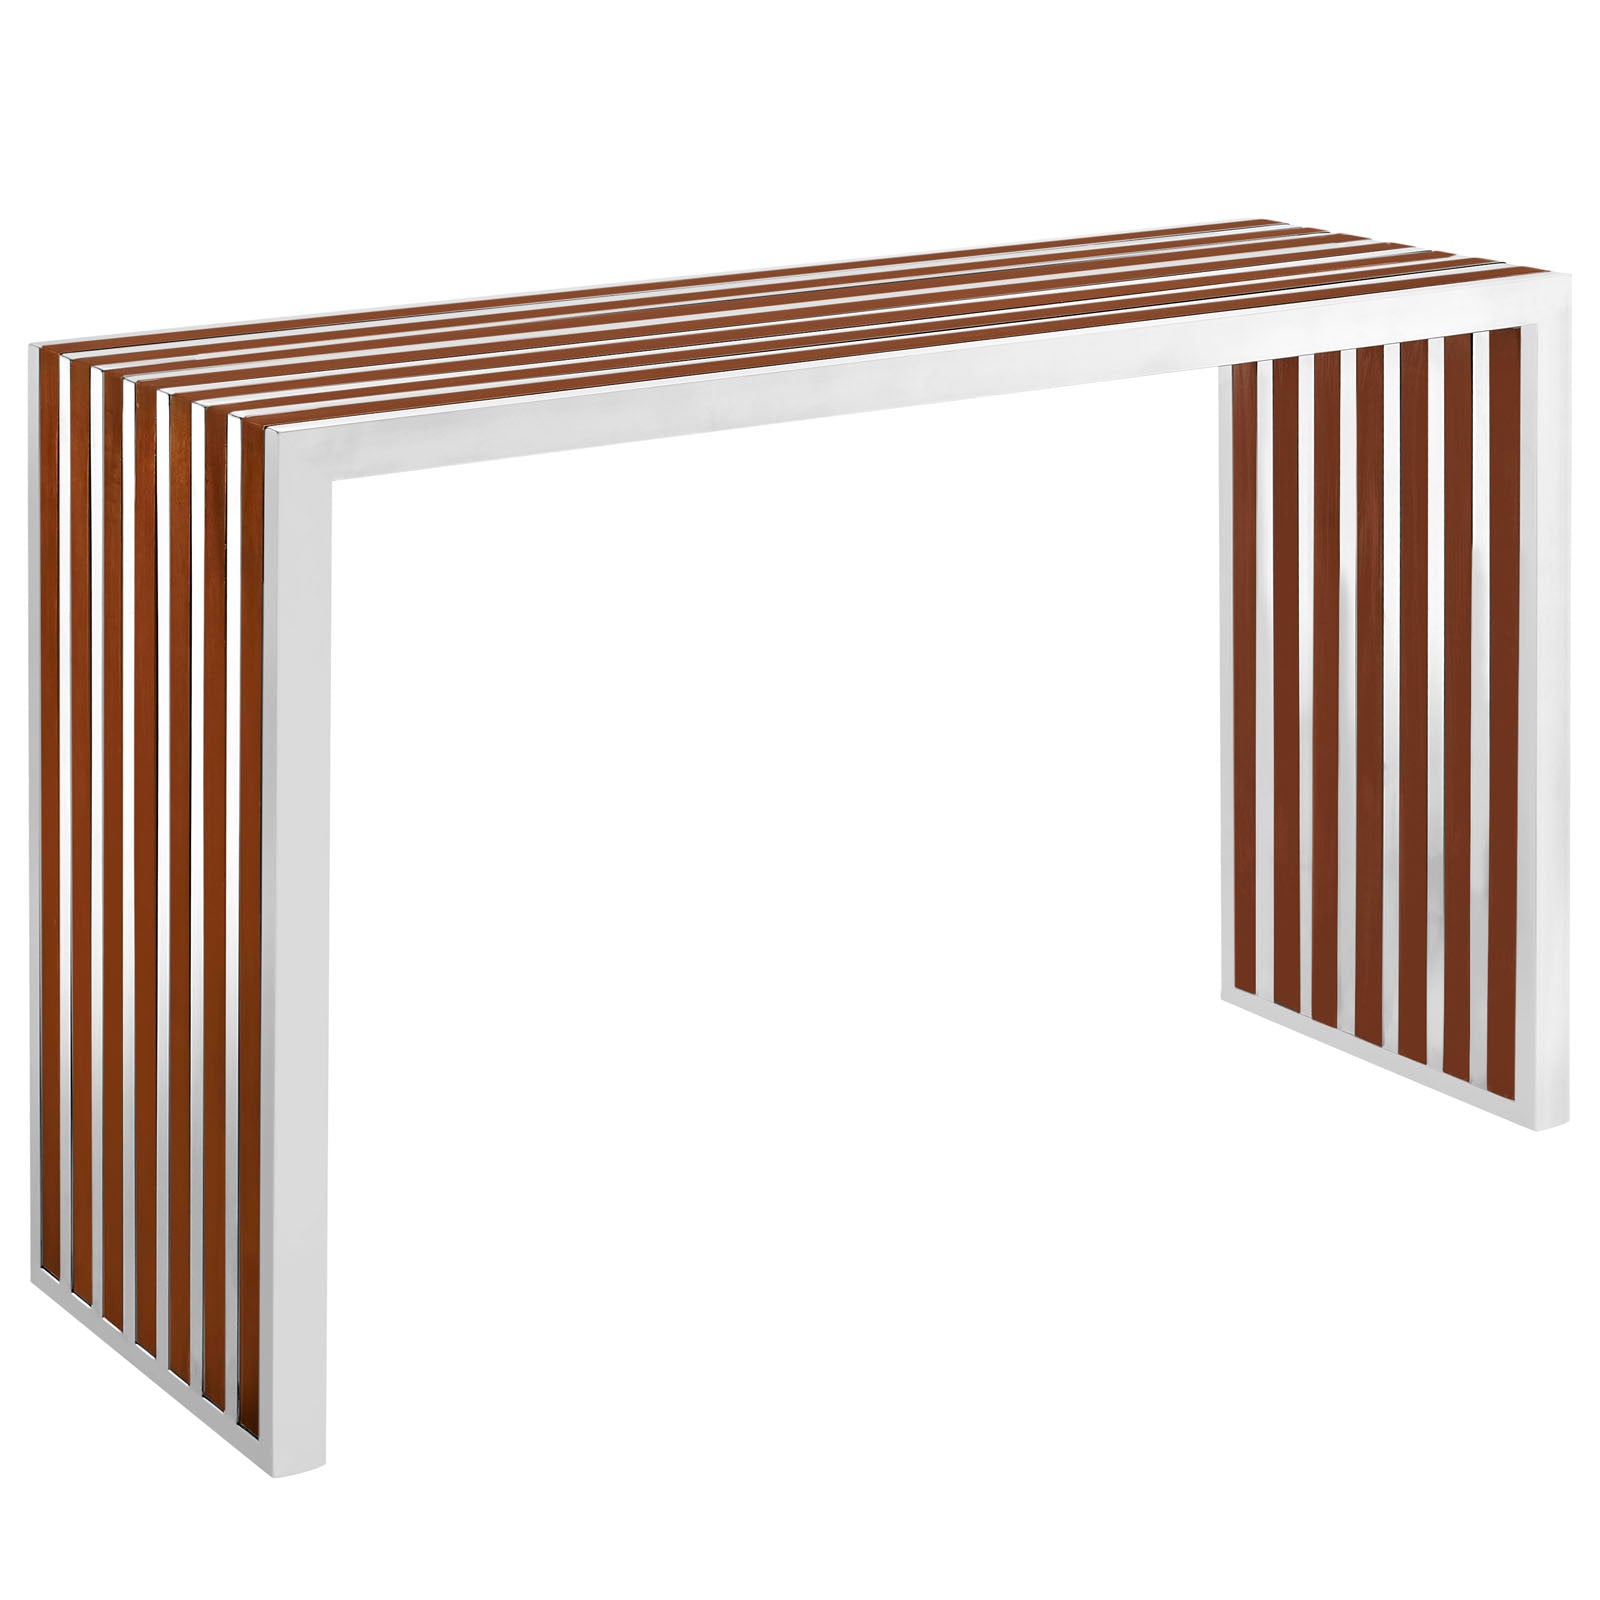 Modern Contemporary Large Stainless Steel Bench With Wood In Walnut